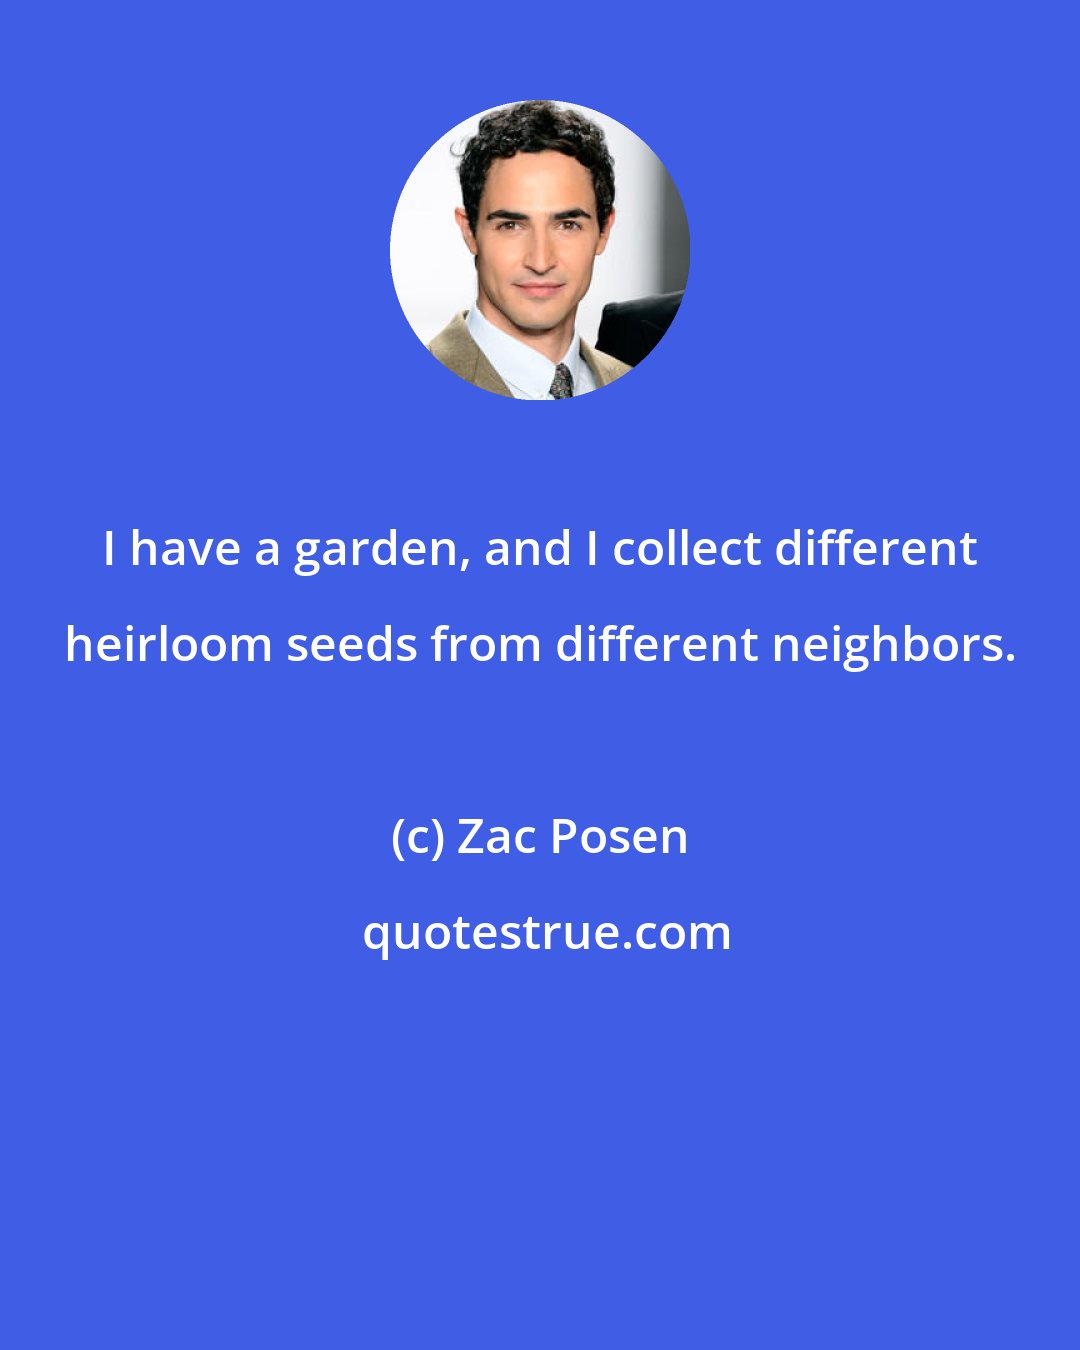 Zac Posen: I have a garden, and I collect different heirloom seeds from different neighbors.